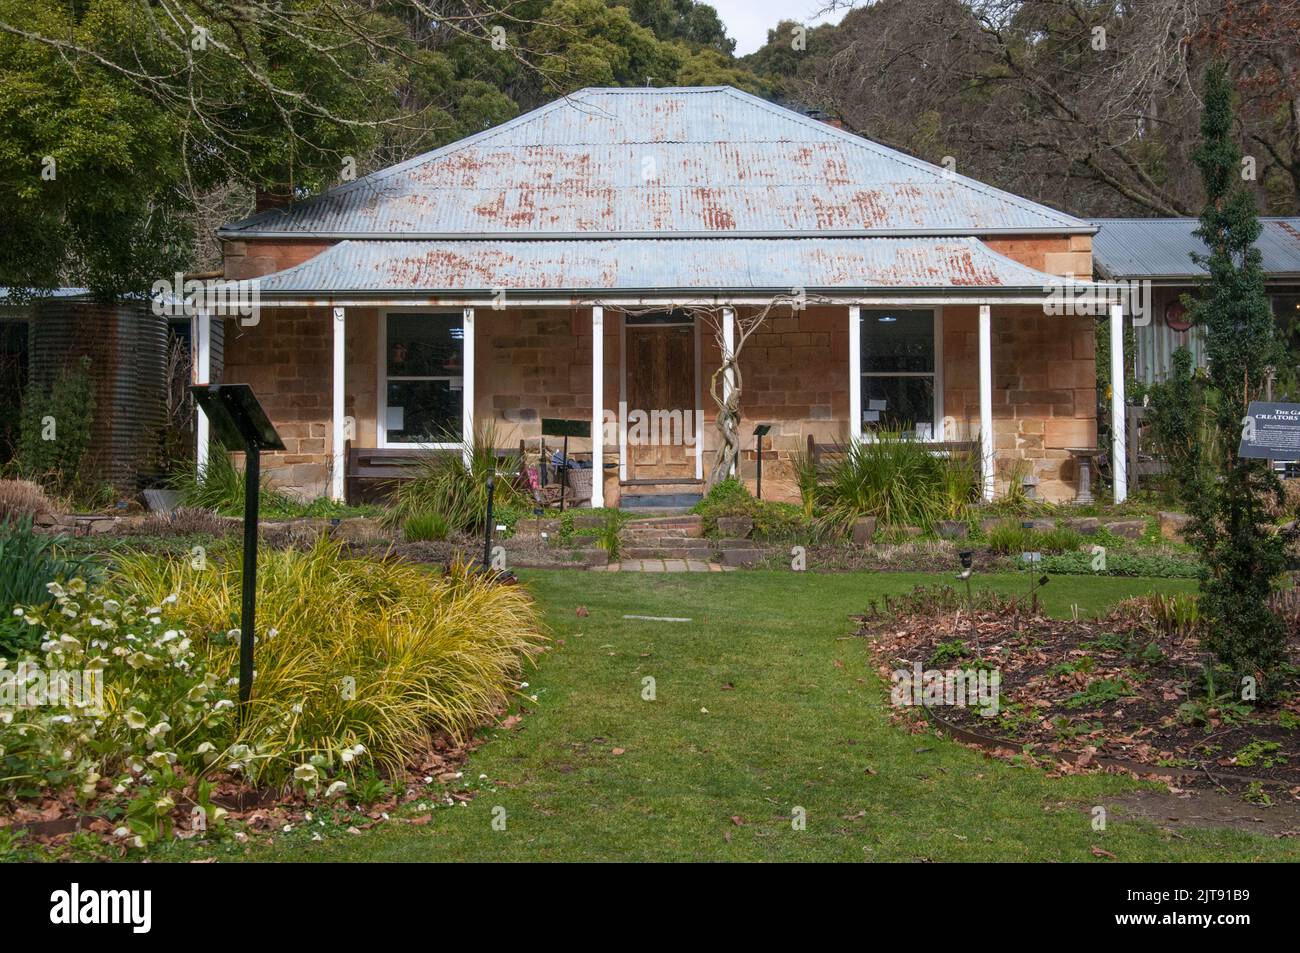 1860s stone cottage at the Garden of St Erth, Blackwood, on the site of the gold rush-era Simmons Reef township, Victoria, Australia Stock Photo